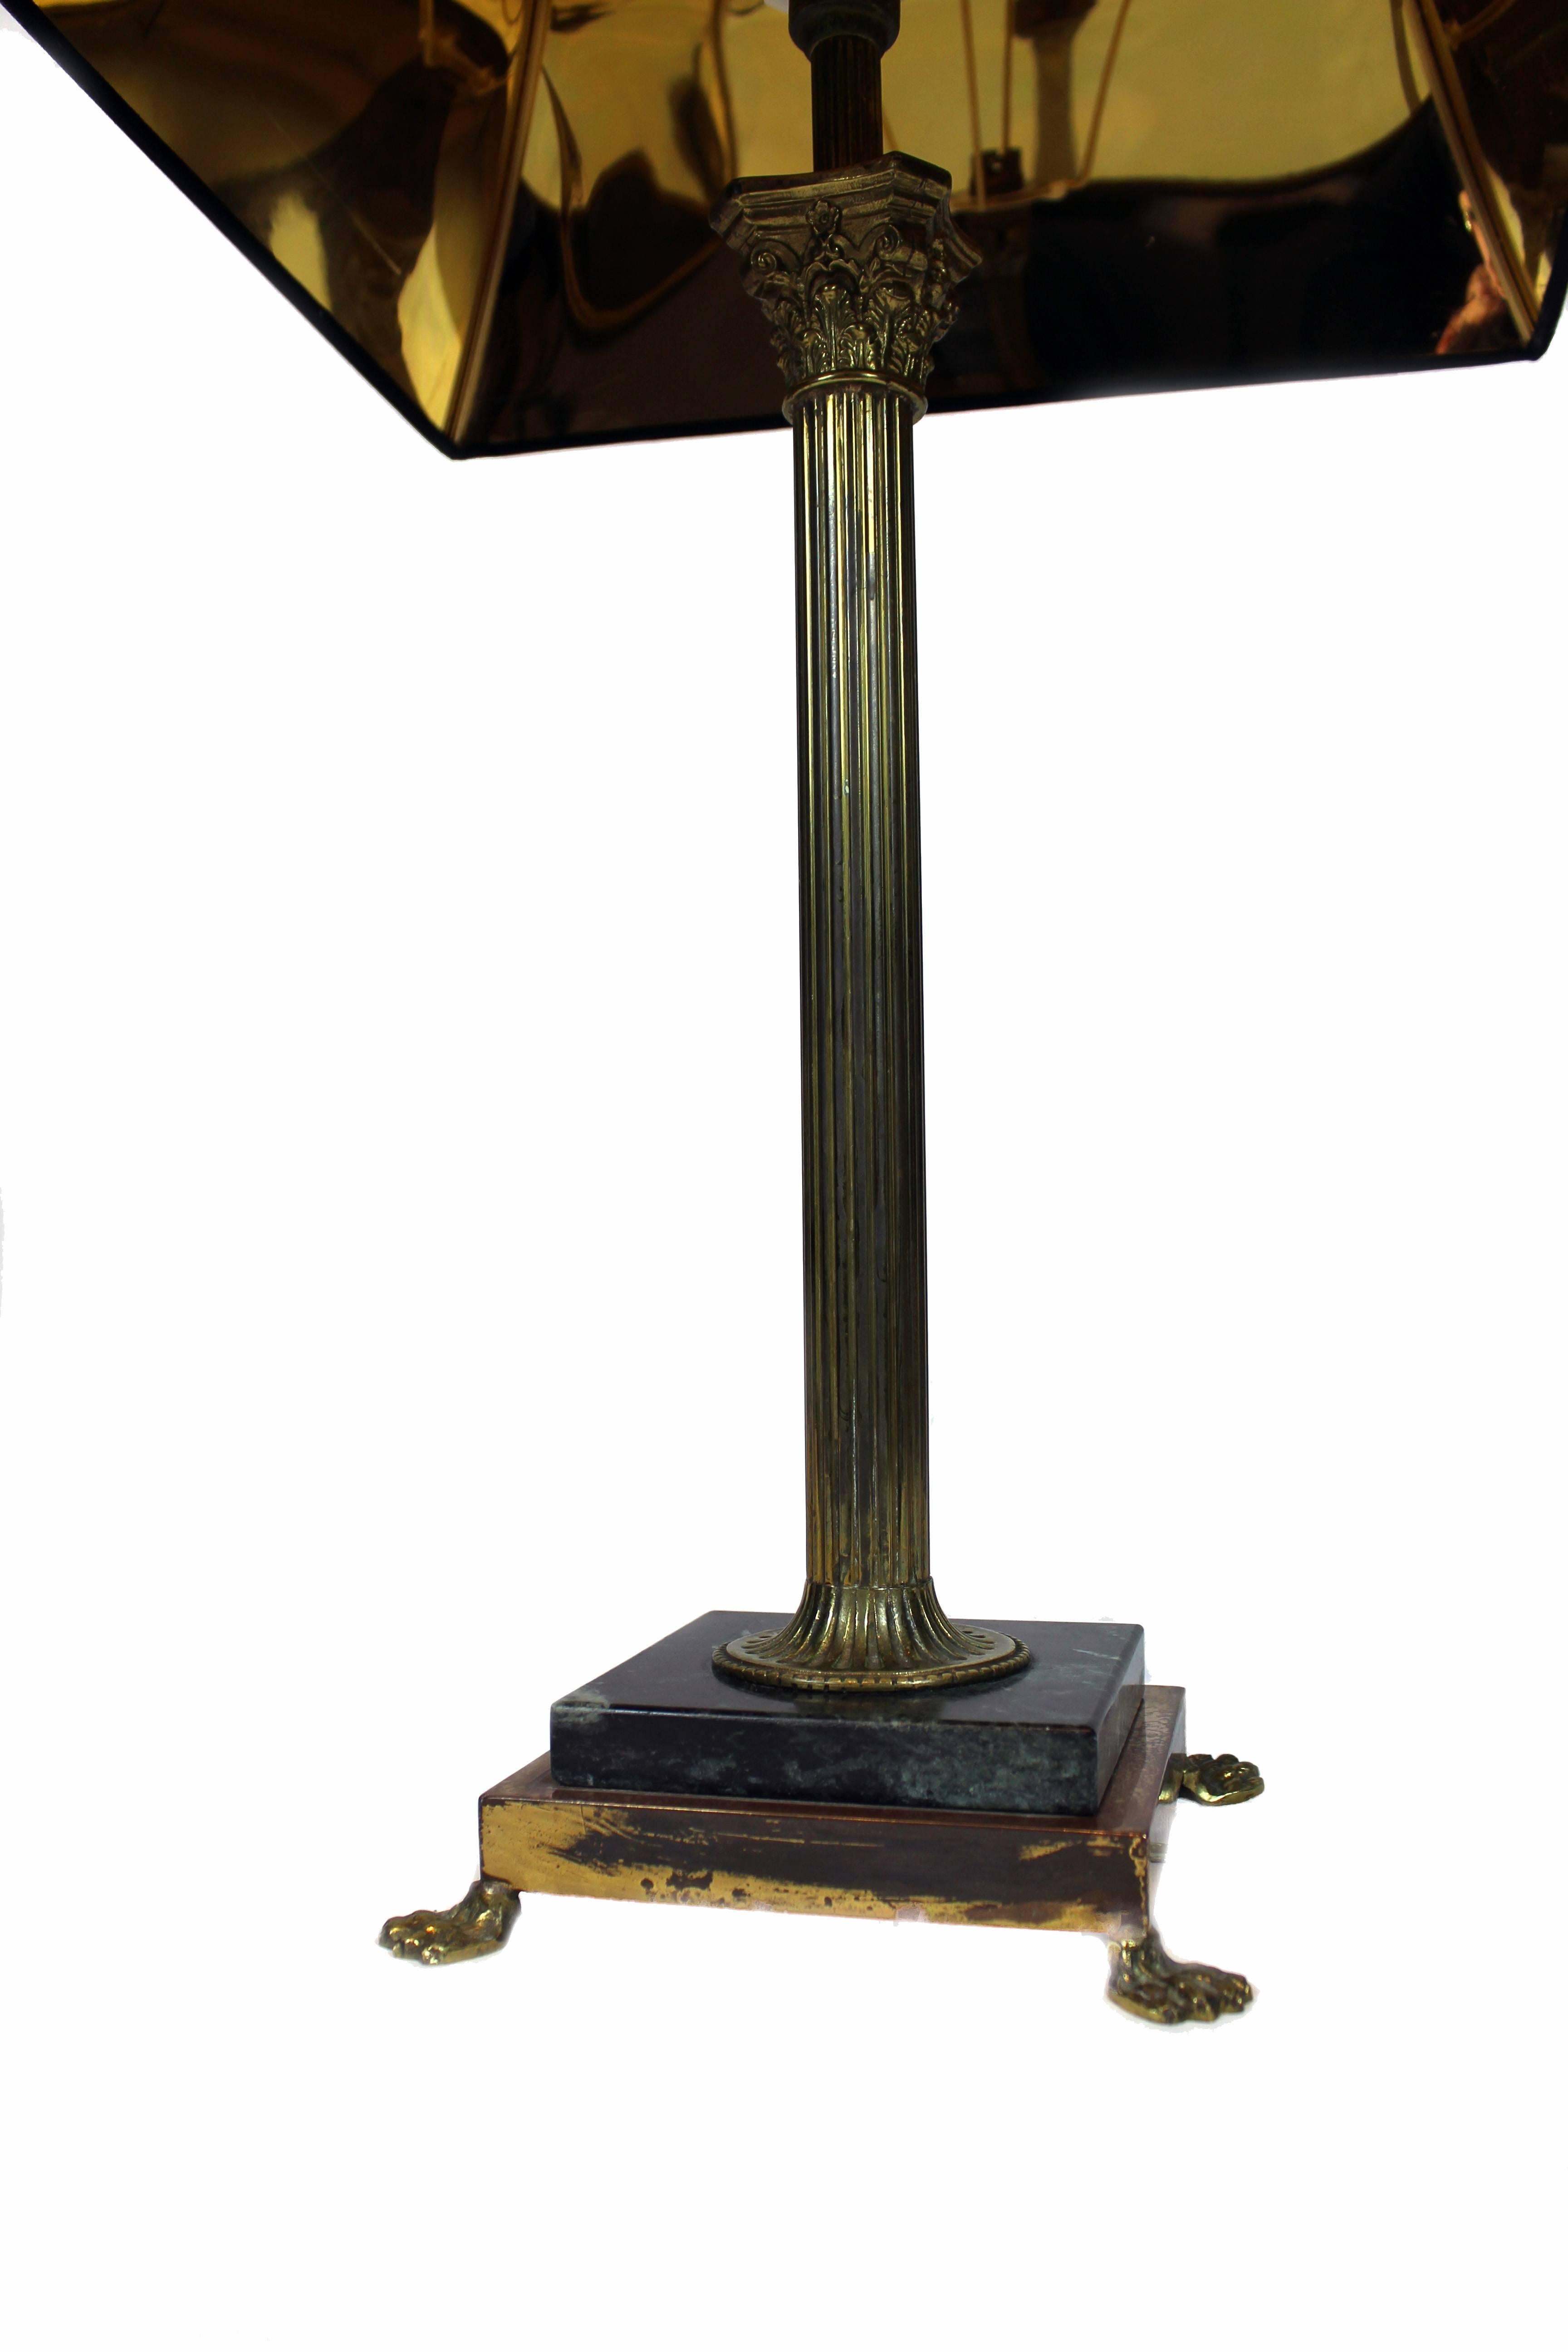 Table lamp with a base made of marble and bronze. The feet of the base seem like lion feet. Made in Italy, circa 1920.